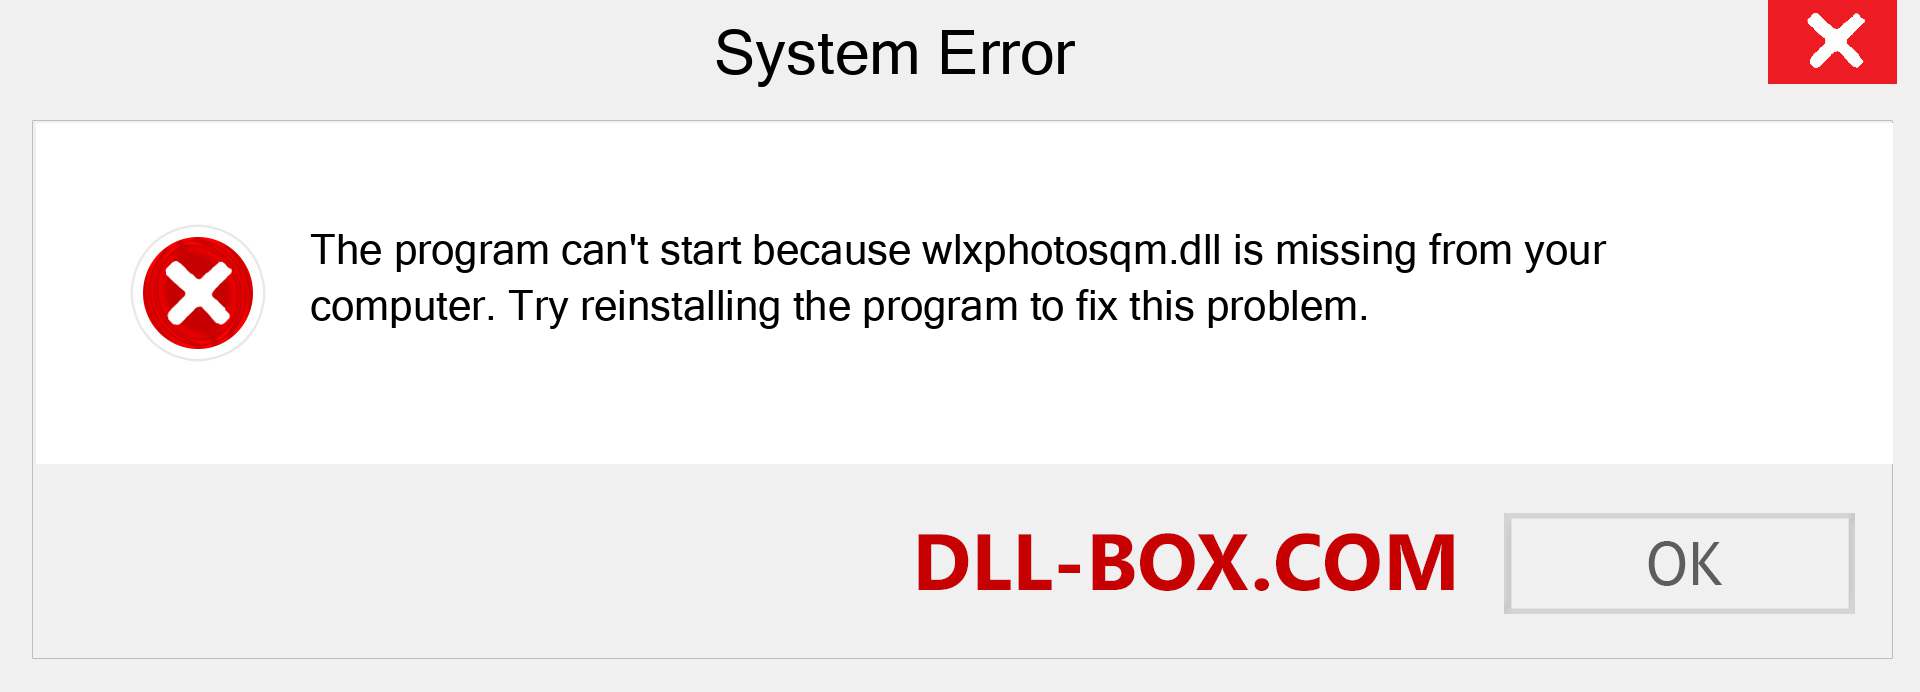  wlxphotosqm.dll file is missing?. Download for Windows 7, 8, 10 - Fix  wlxphotosqm dll Missing Error on Windows, photos, images